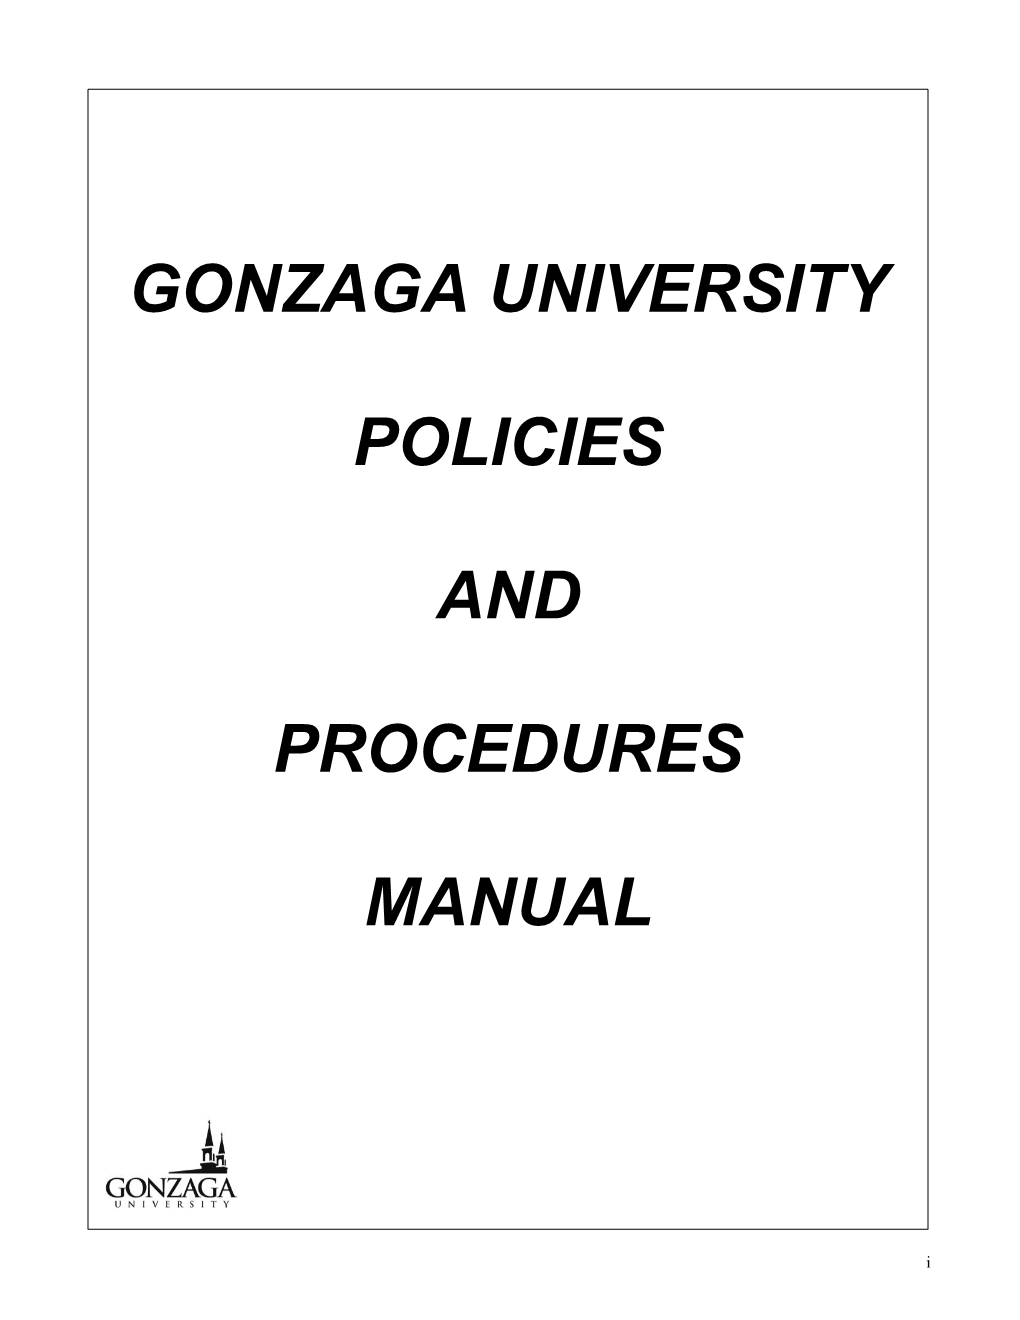 Gonzaga University Policies and Procedures Manual Describes Policies, Procedures, and Benefits Established by the President of Gonzaga University